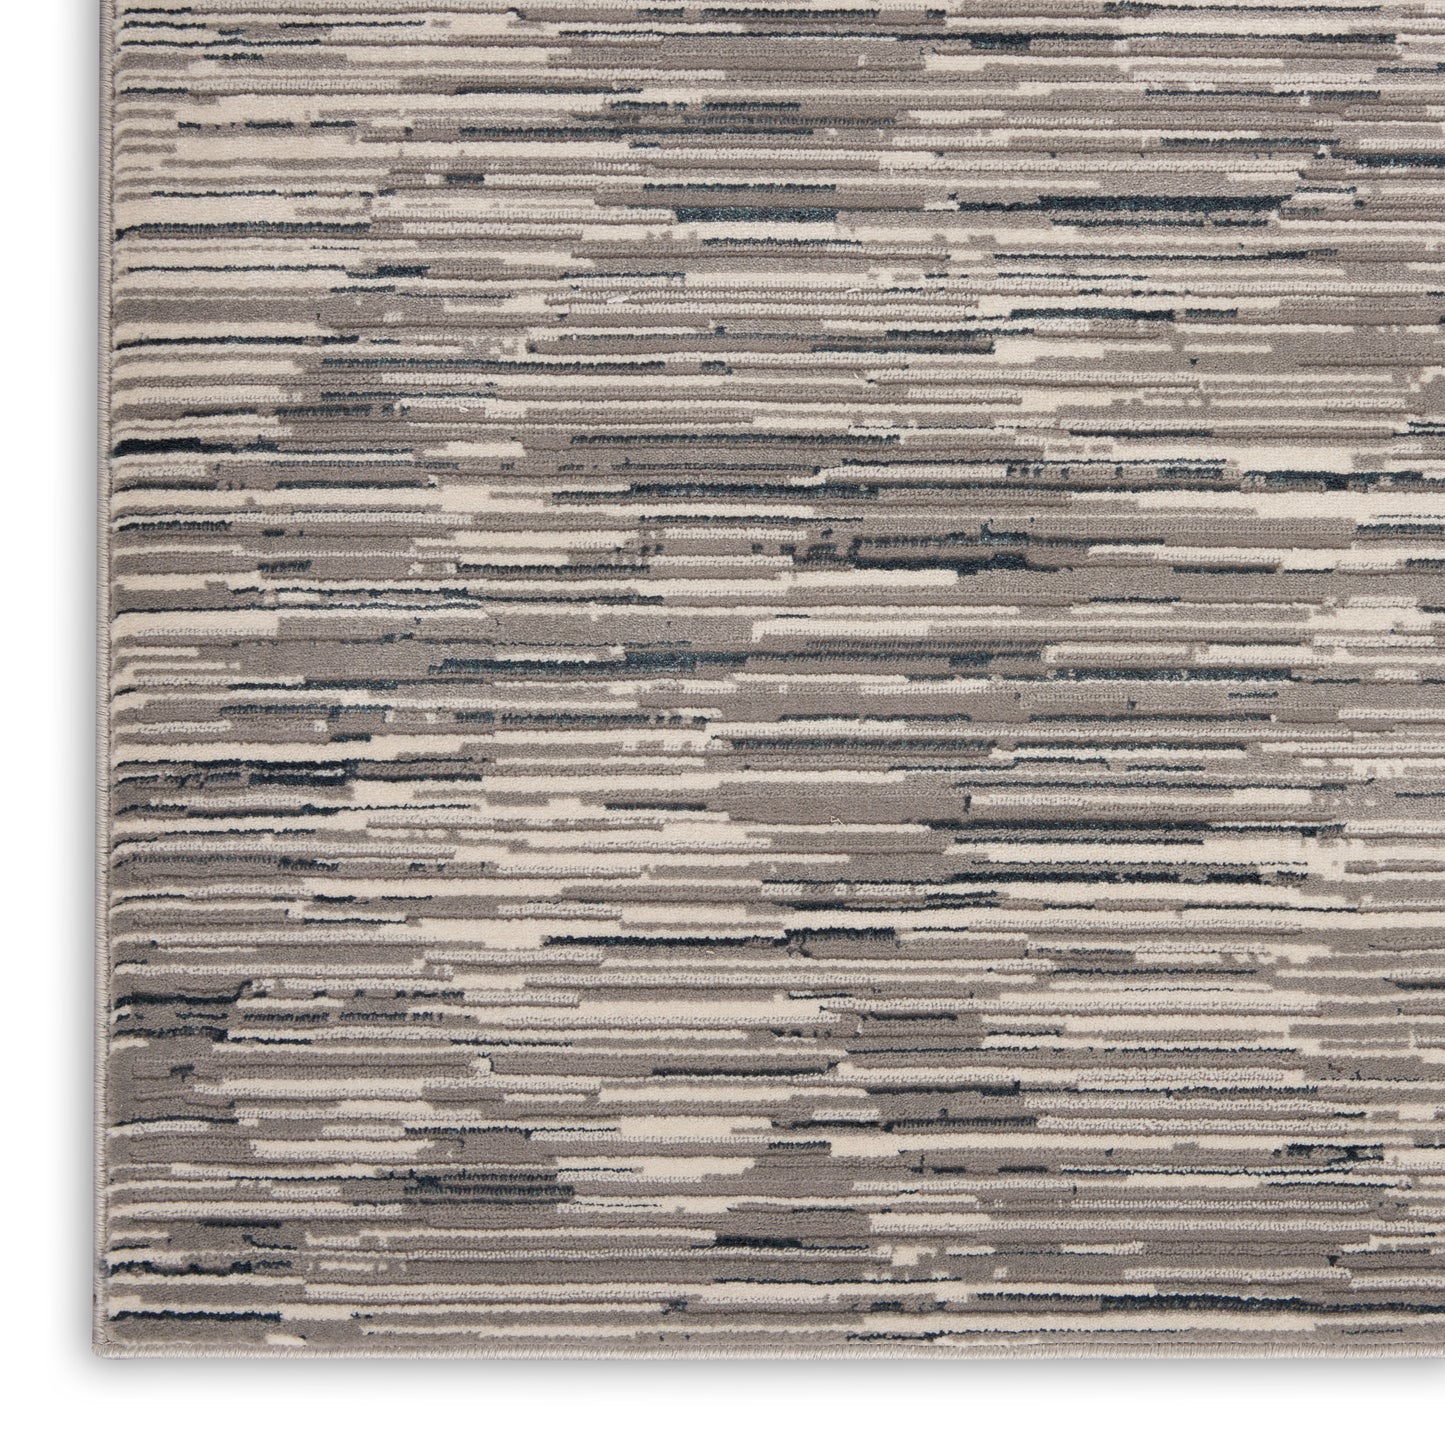 Michael Amini MA90 Uptown UPT01 Grey Ivory  Contemporary Machinemade Rug